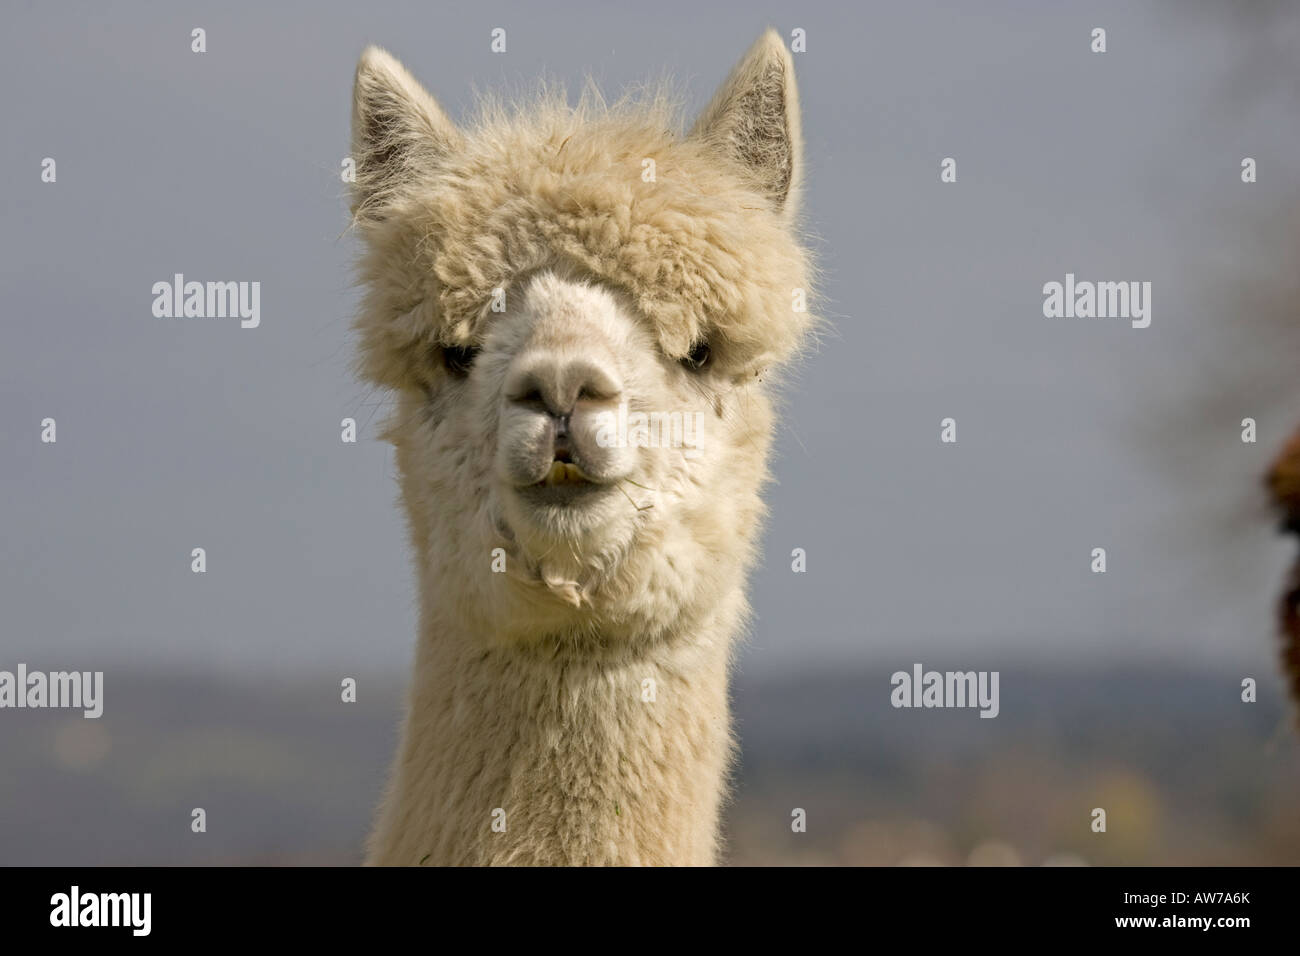 Head High Resolution Stock Photography and - Alamy